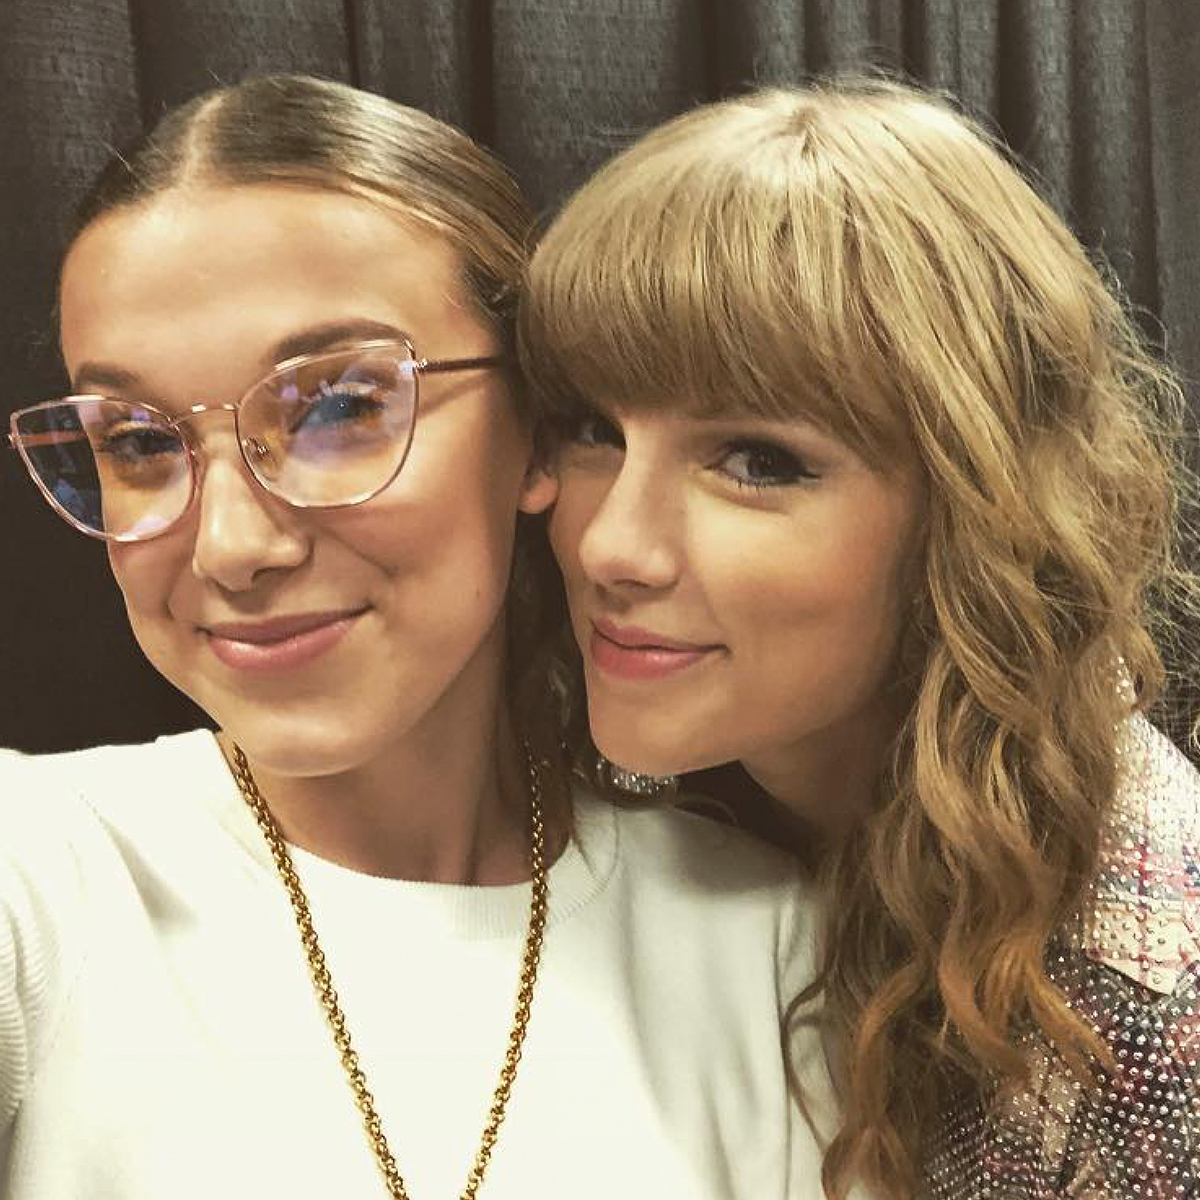 Millie Bobby Brown Wore This to a Taylor Swift Concert